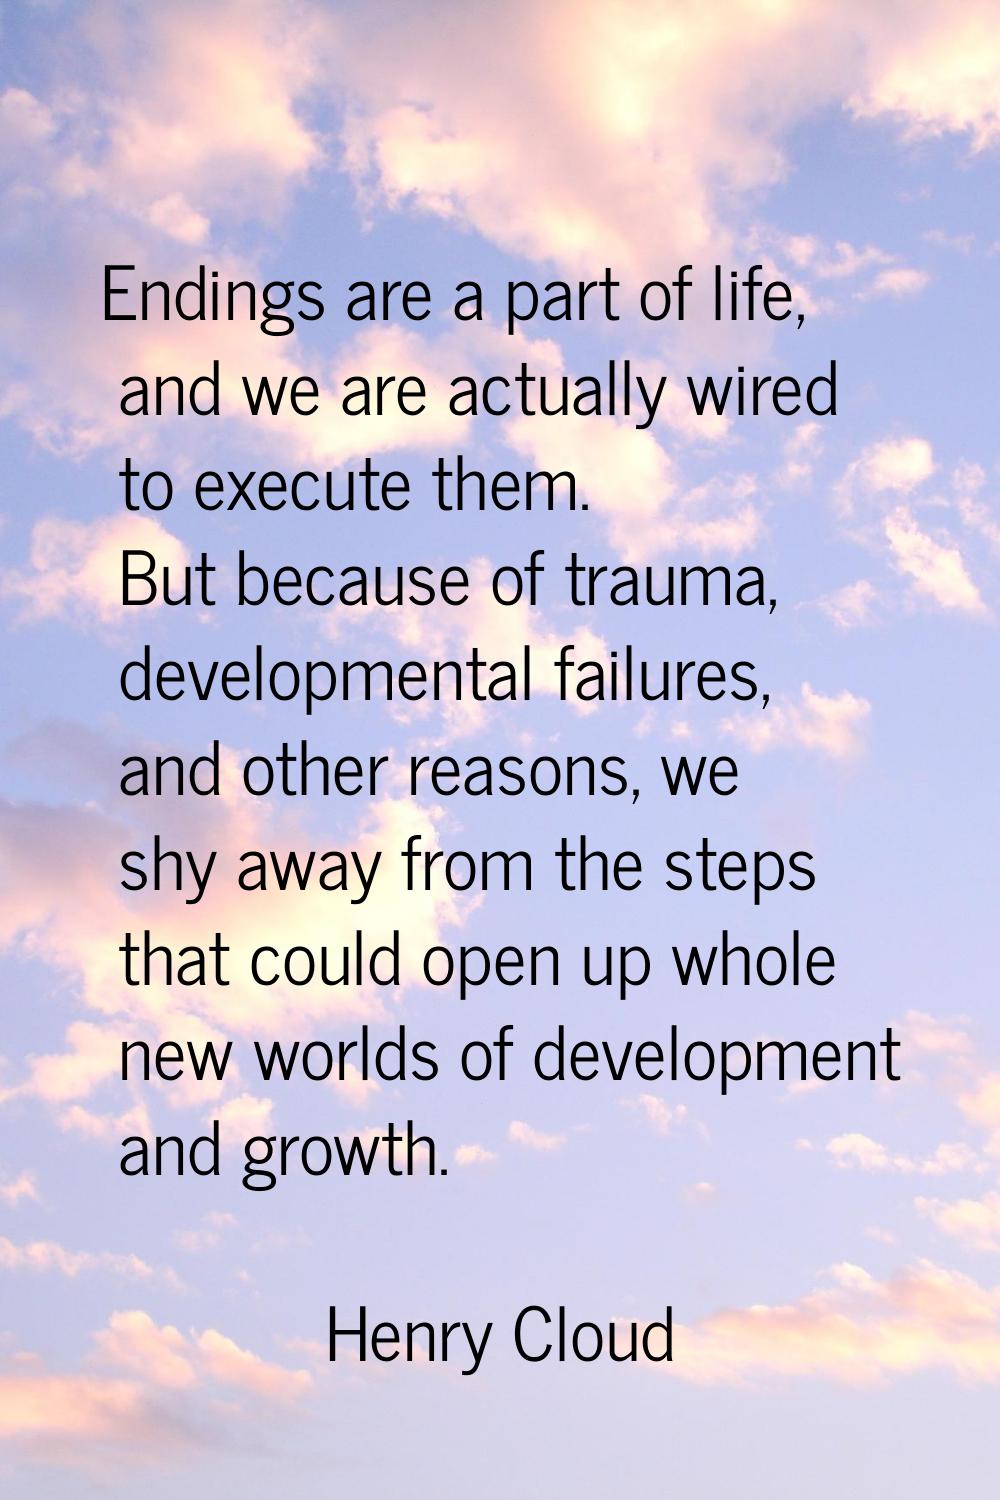 Endings are a part of life, and we are actually wired to execute them. But because of trauma, devel